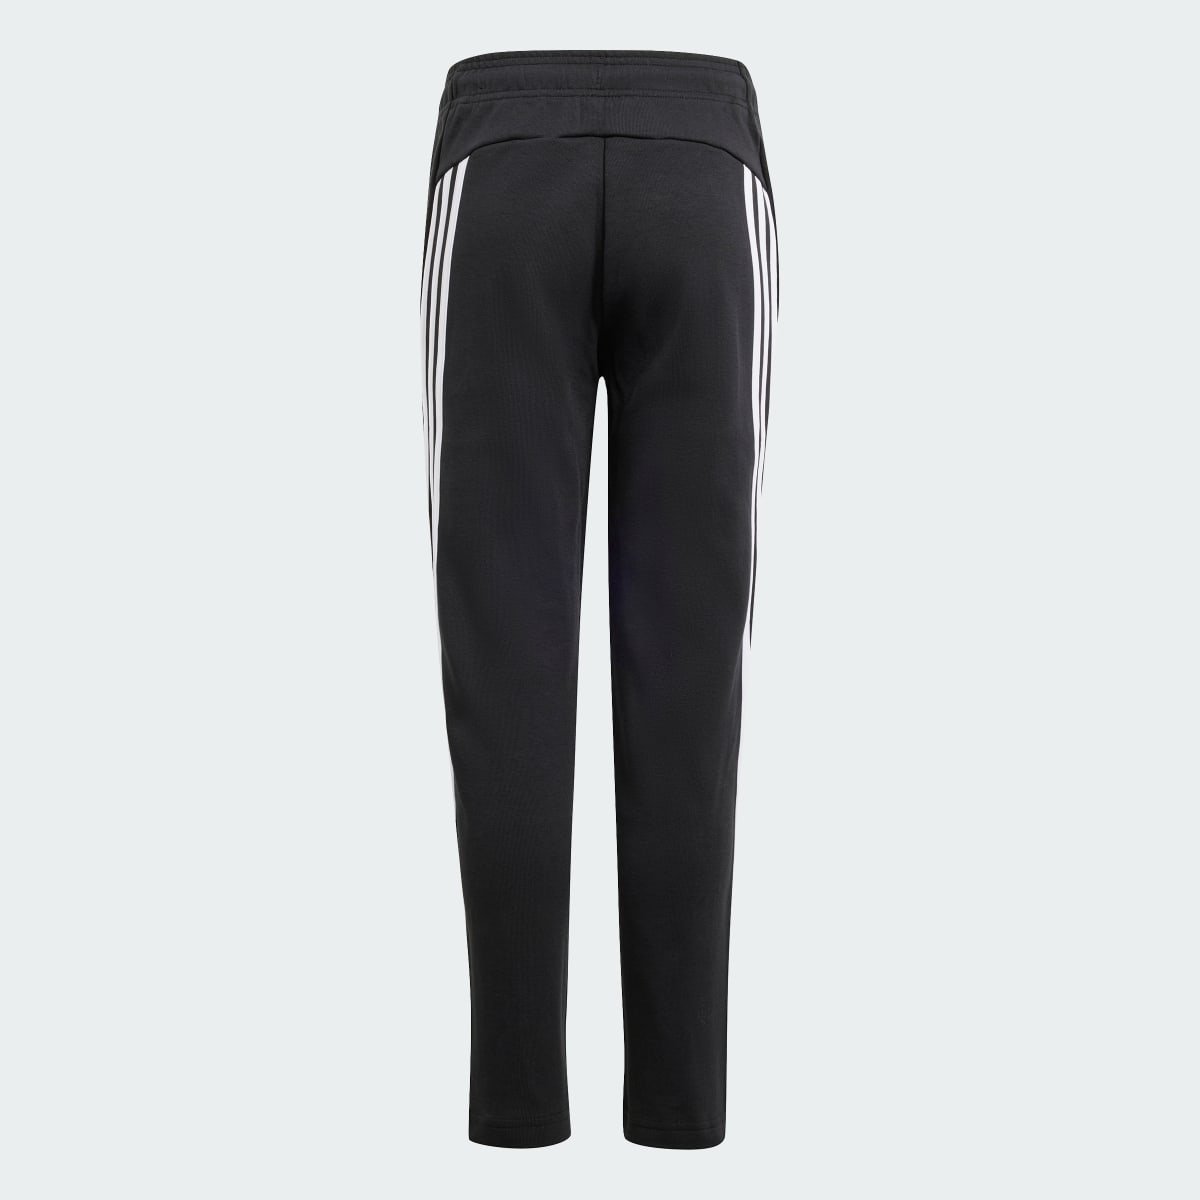 Adidas Future Icons 3-Stripes Ankle-Length Tracksuit Bottoms. 4